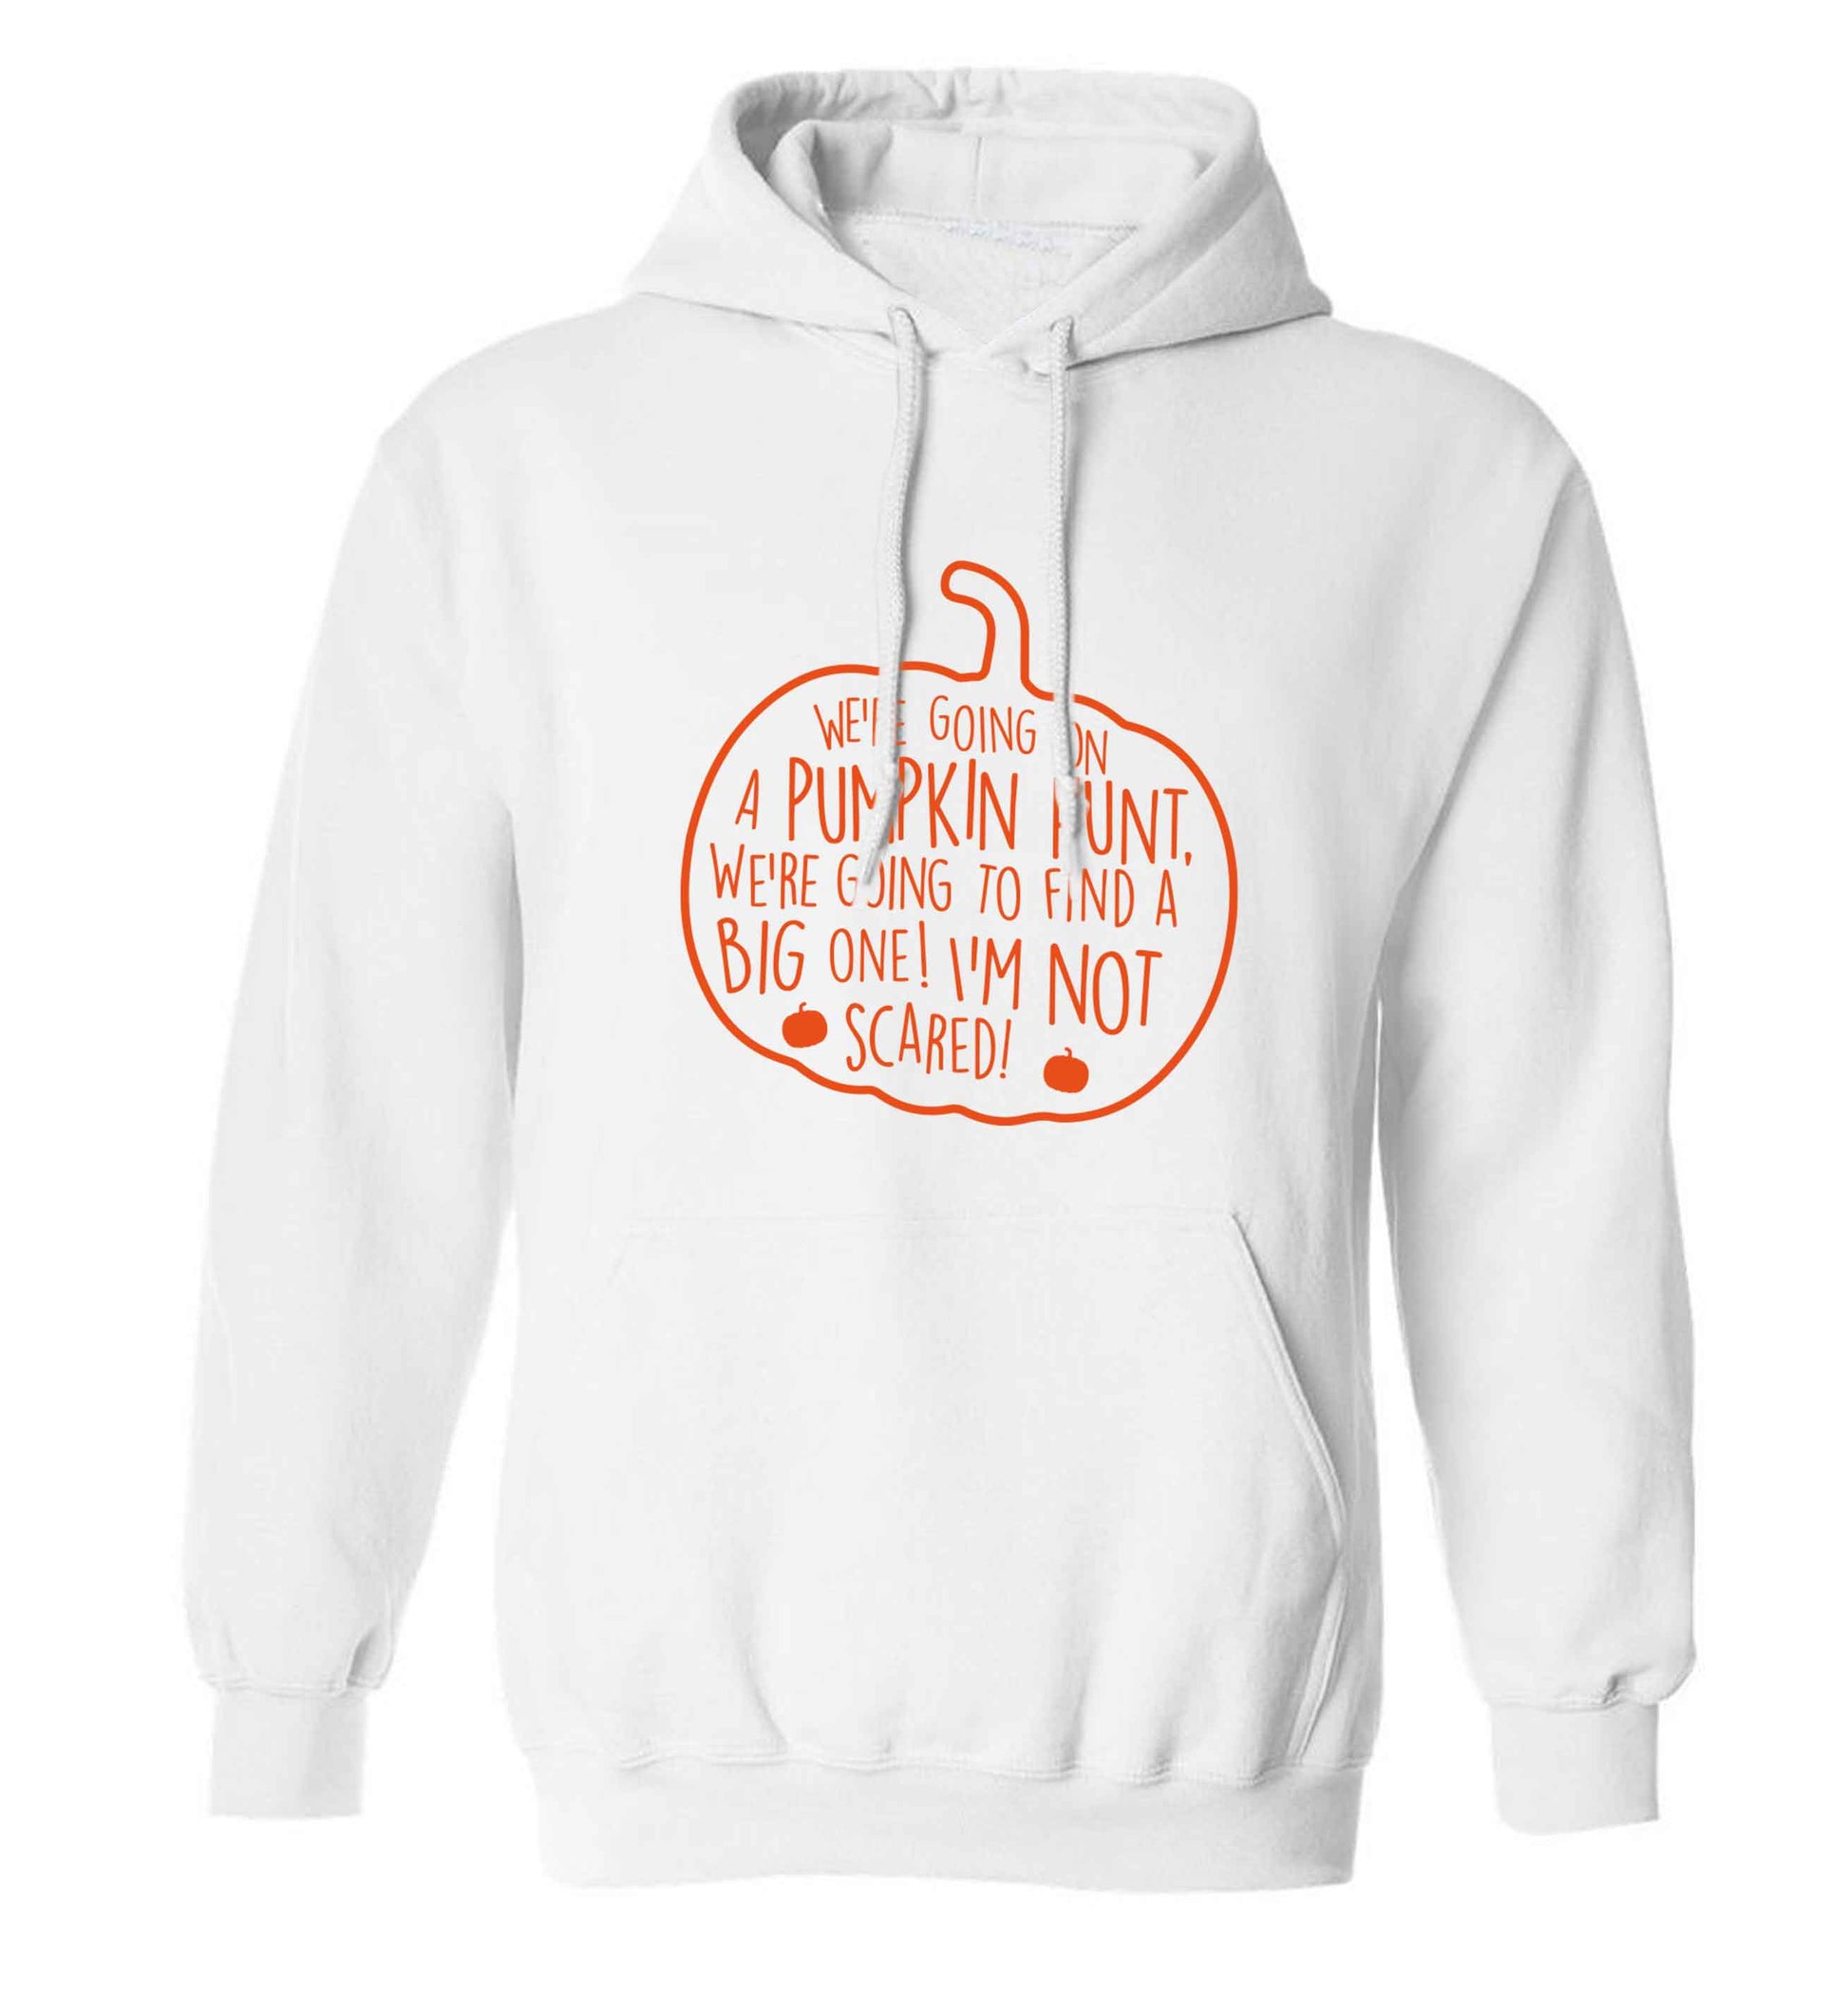 We're going on a pumpkin hunt adults unisex white hoodie 2XL